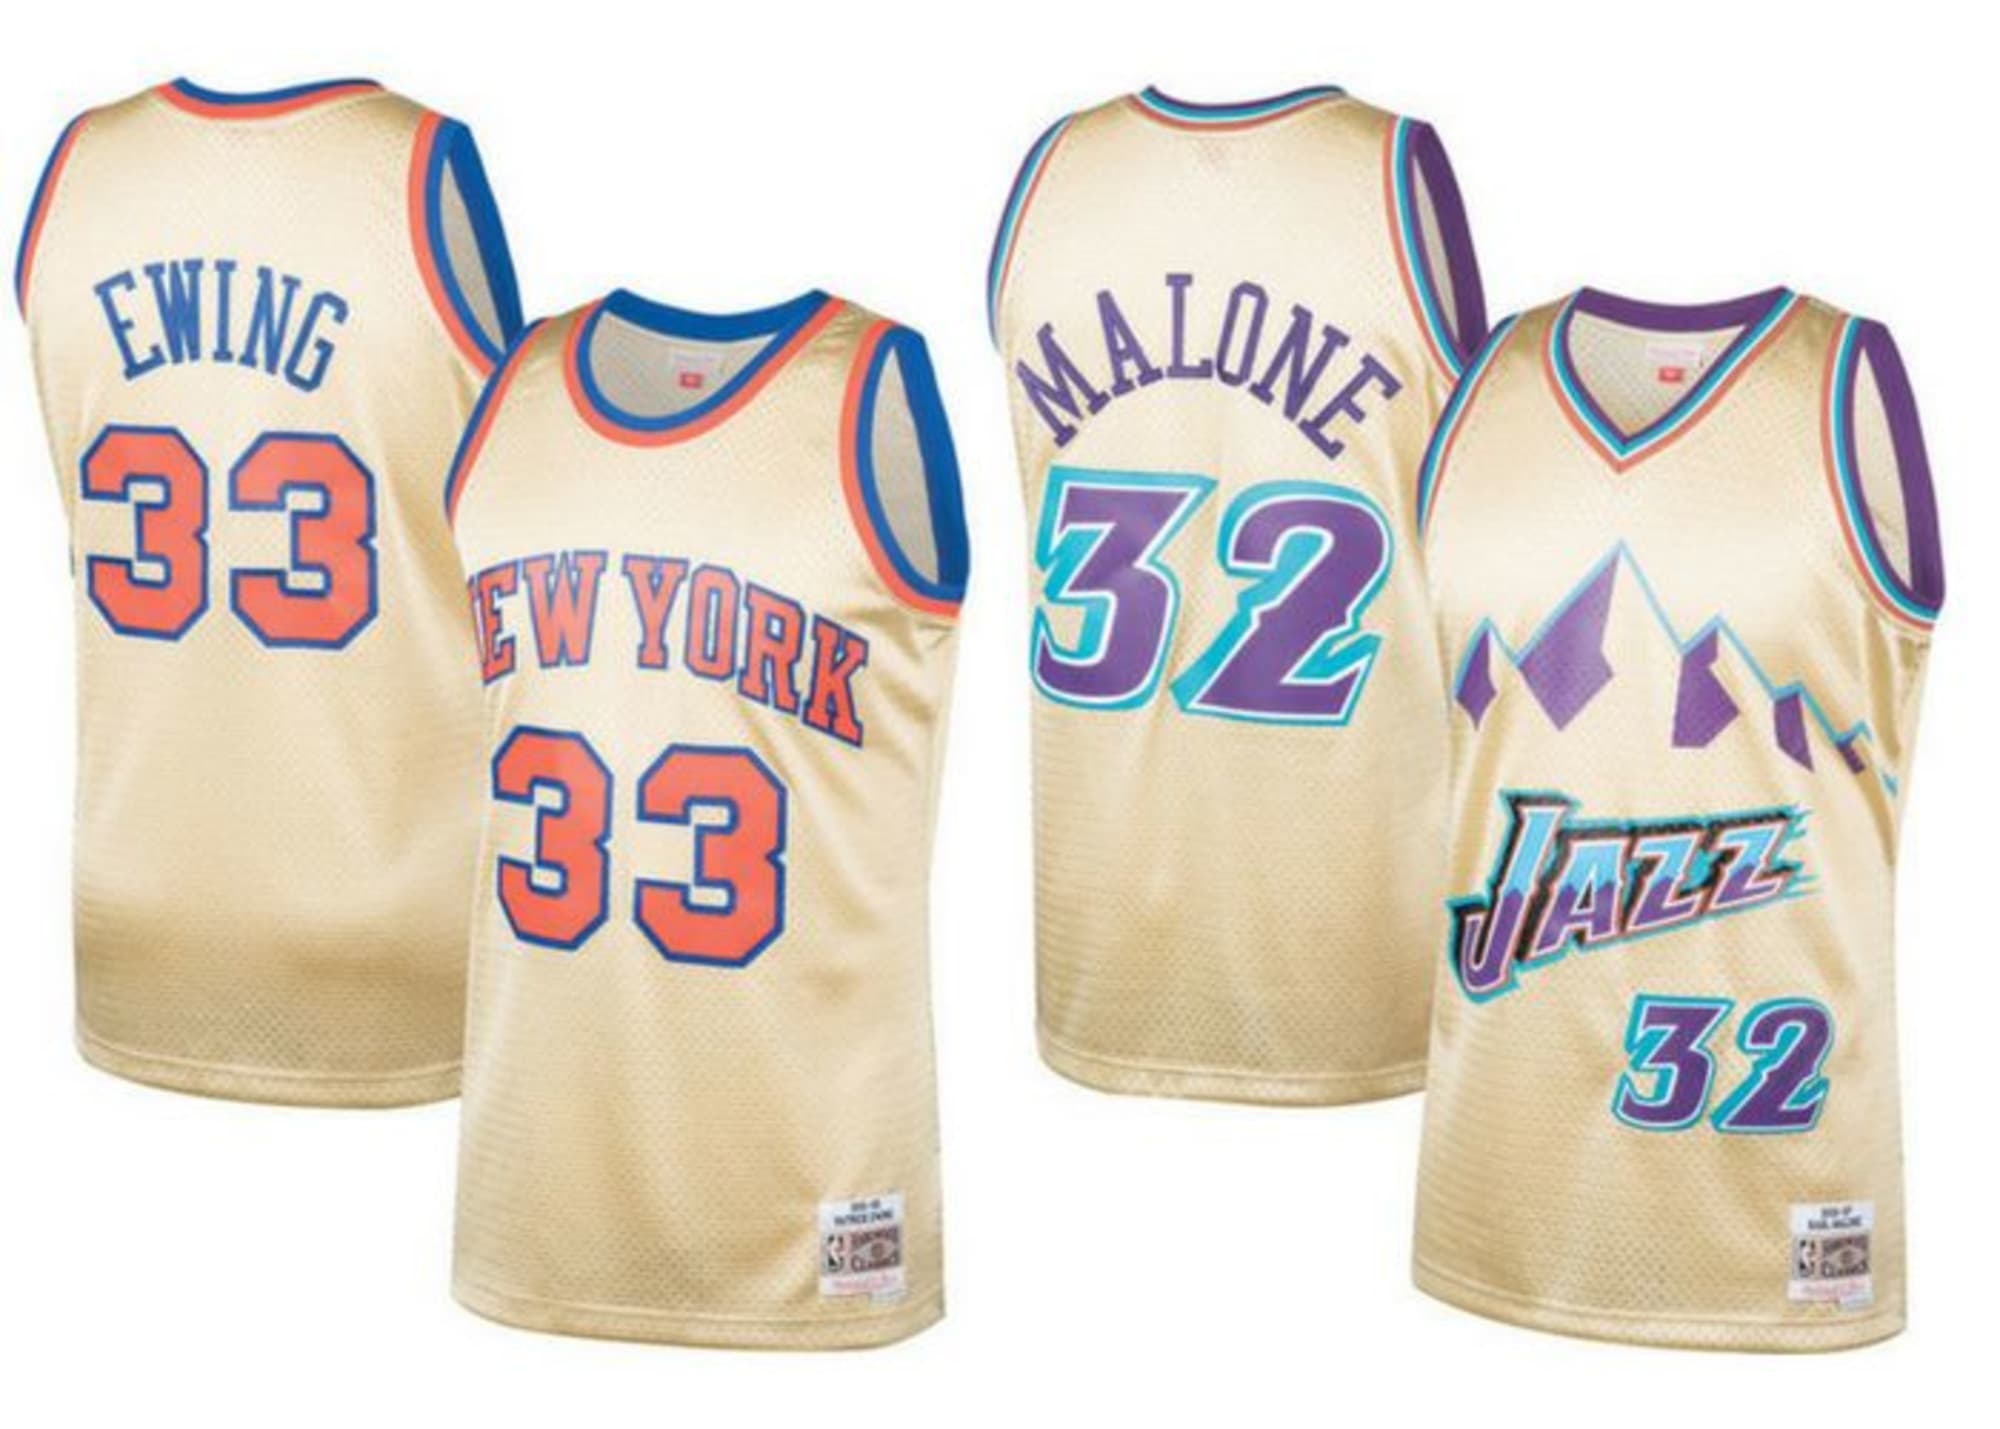 Couple of the new @mitchellandness Hardwood Classics that have hit the  stores this week! #nbajerseys #nba #mitchellandness…